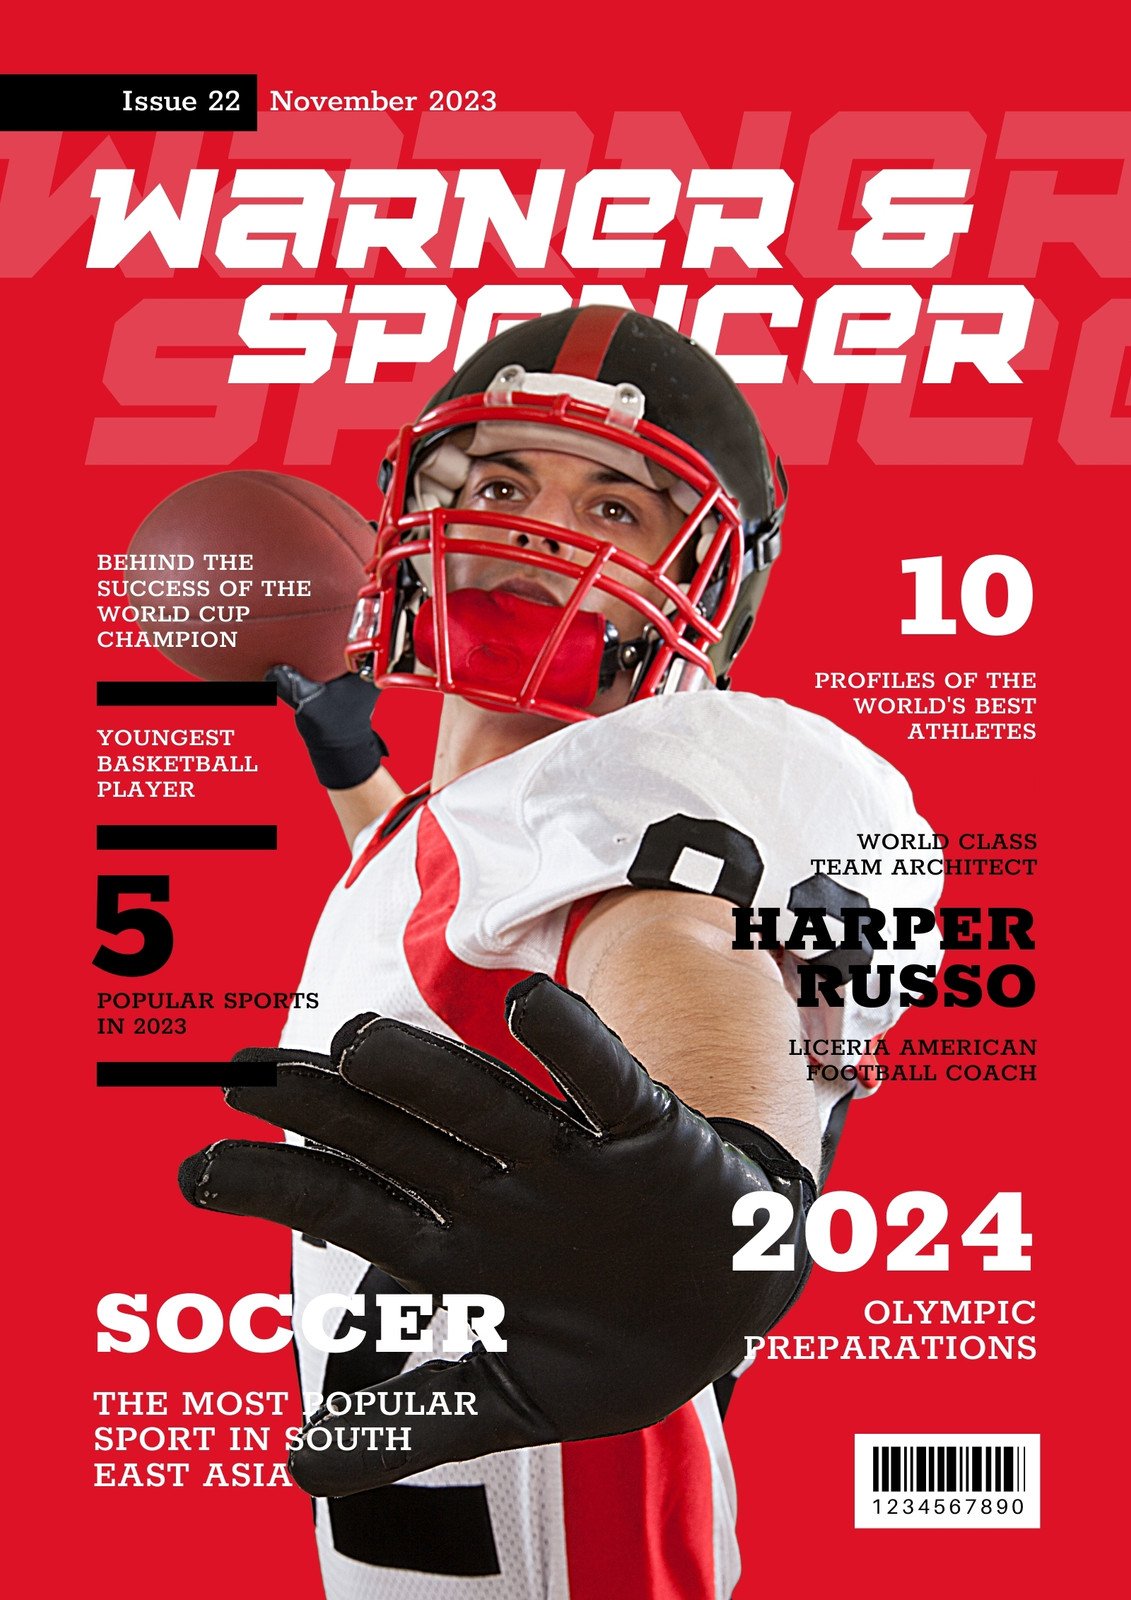 Sports Illustrated high school athlete covers through the years